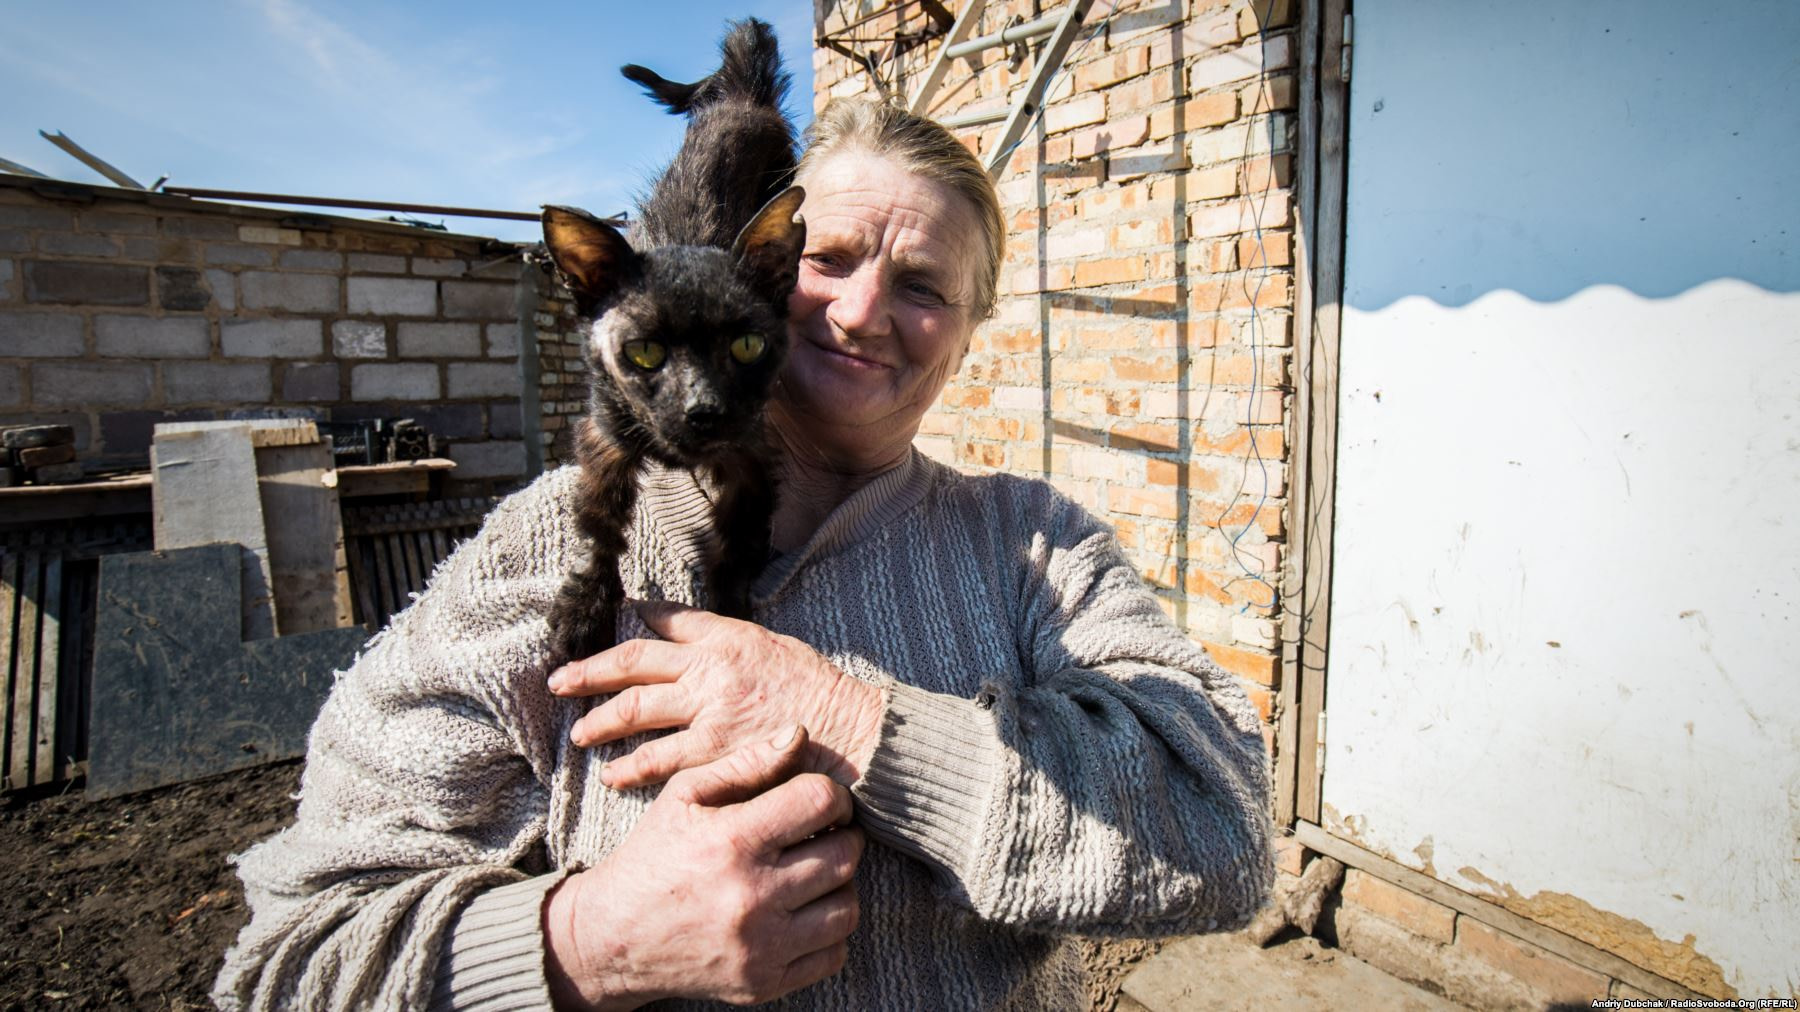 Kral with her cat, Timka. The cat was discovered badly wounded "with blood covering half of its face" after a recent battle, and Kral is now nursing him back to health. Photo by: Andriy Dubchak